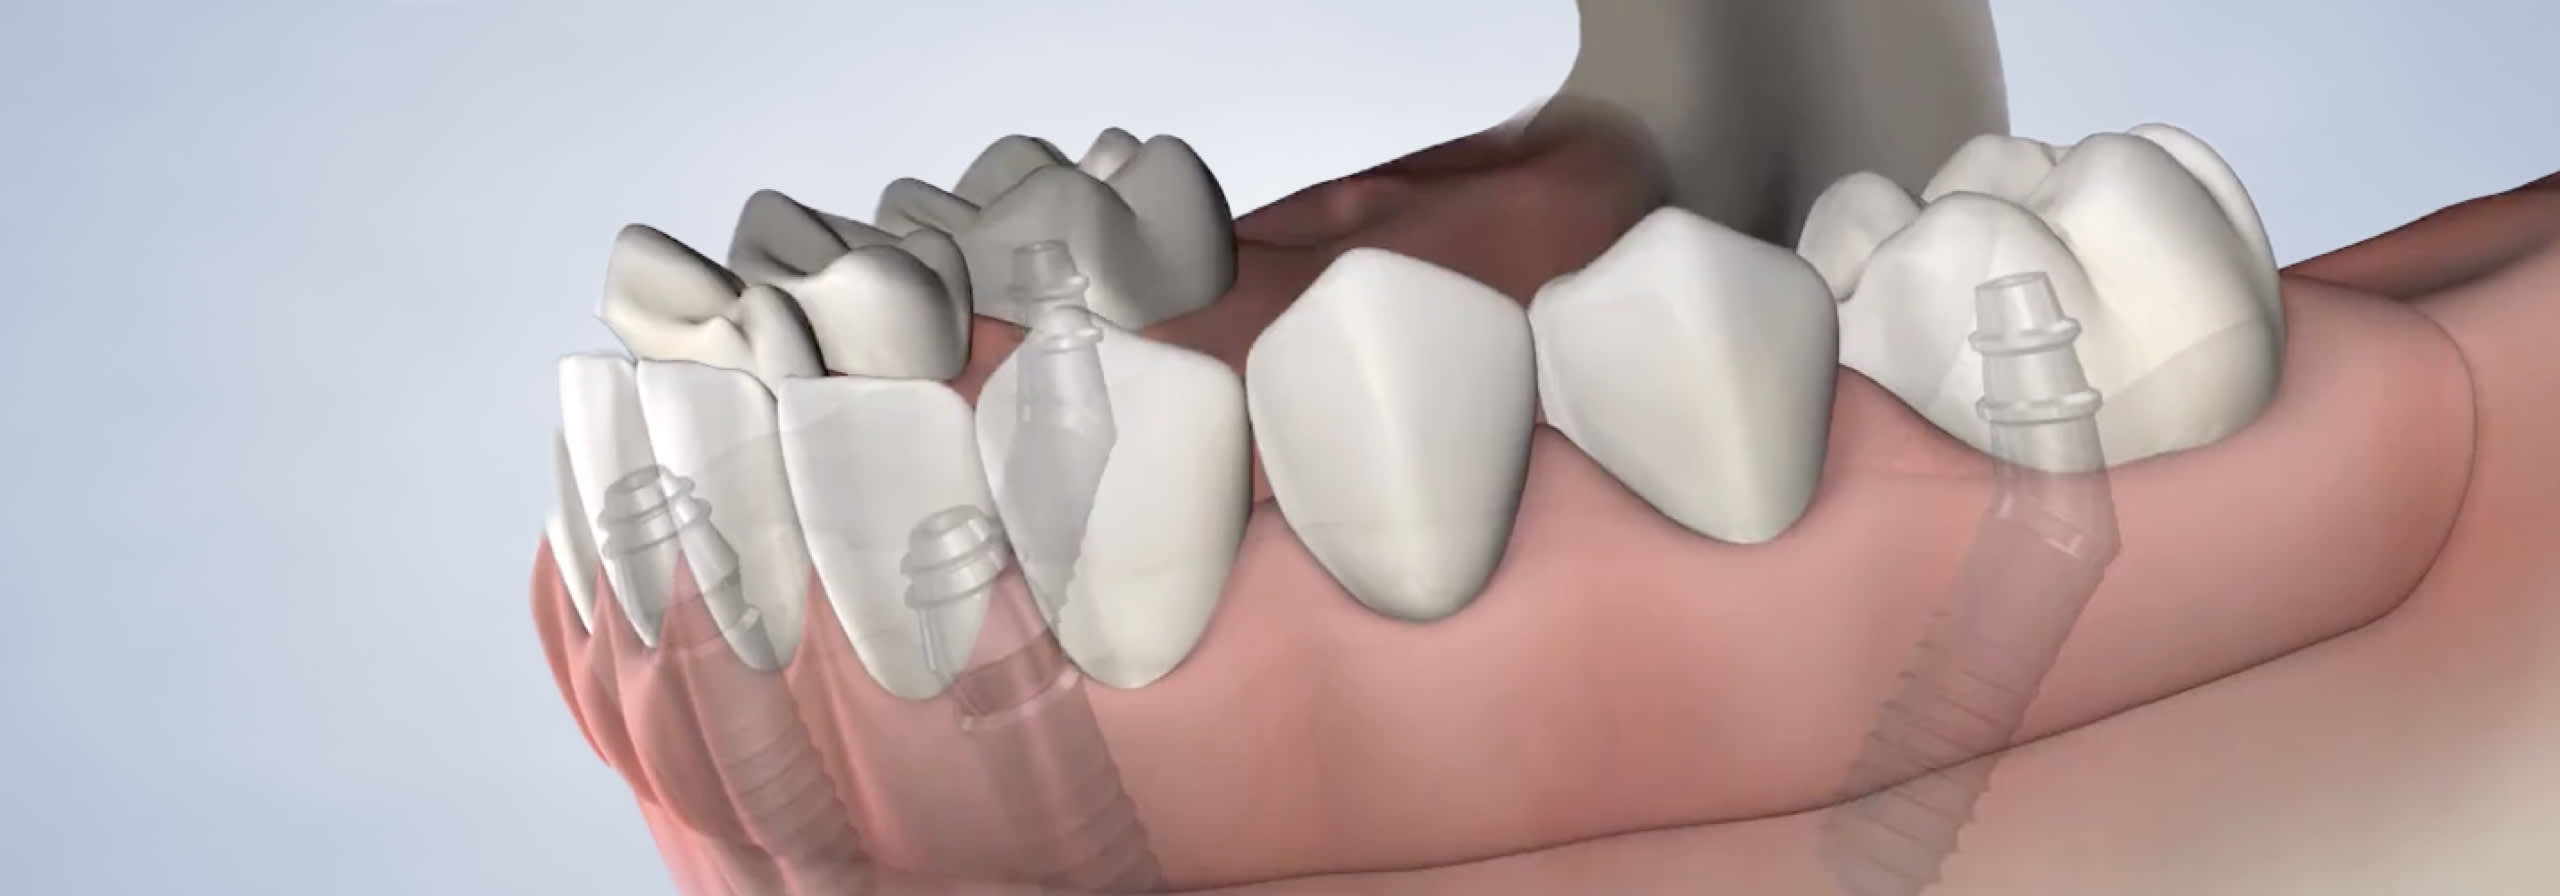 Bottom row of teeth with screws holding in place.